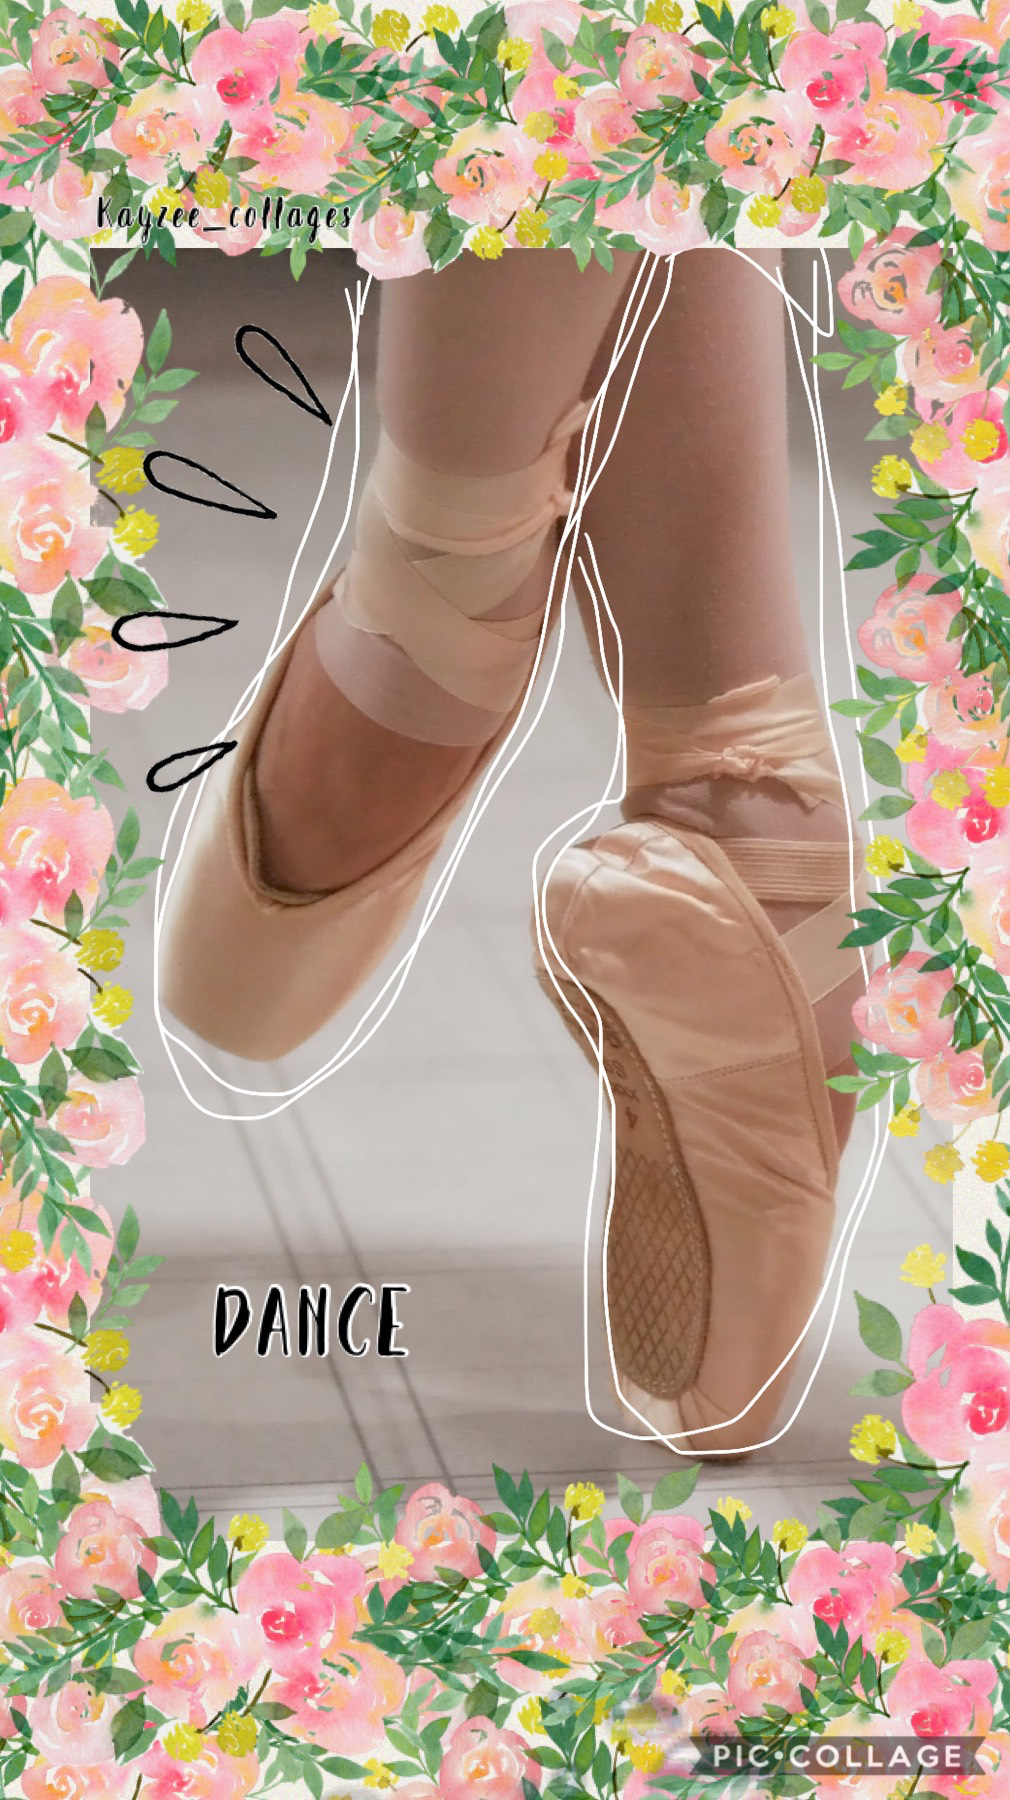 •Dance• 
Hit that follow button, I’m new and trying to improve! Please leave tips in the comments! ♥️